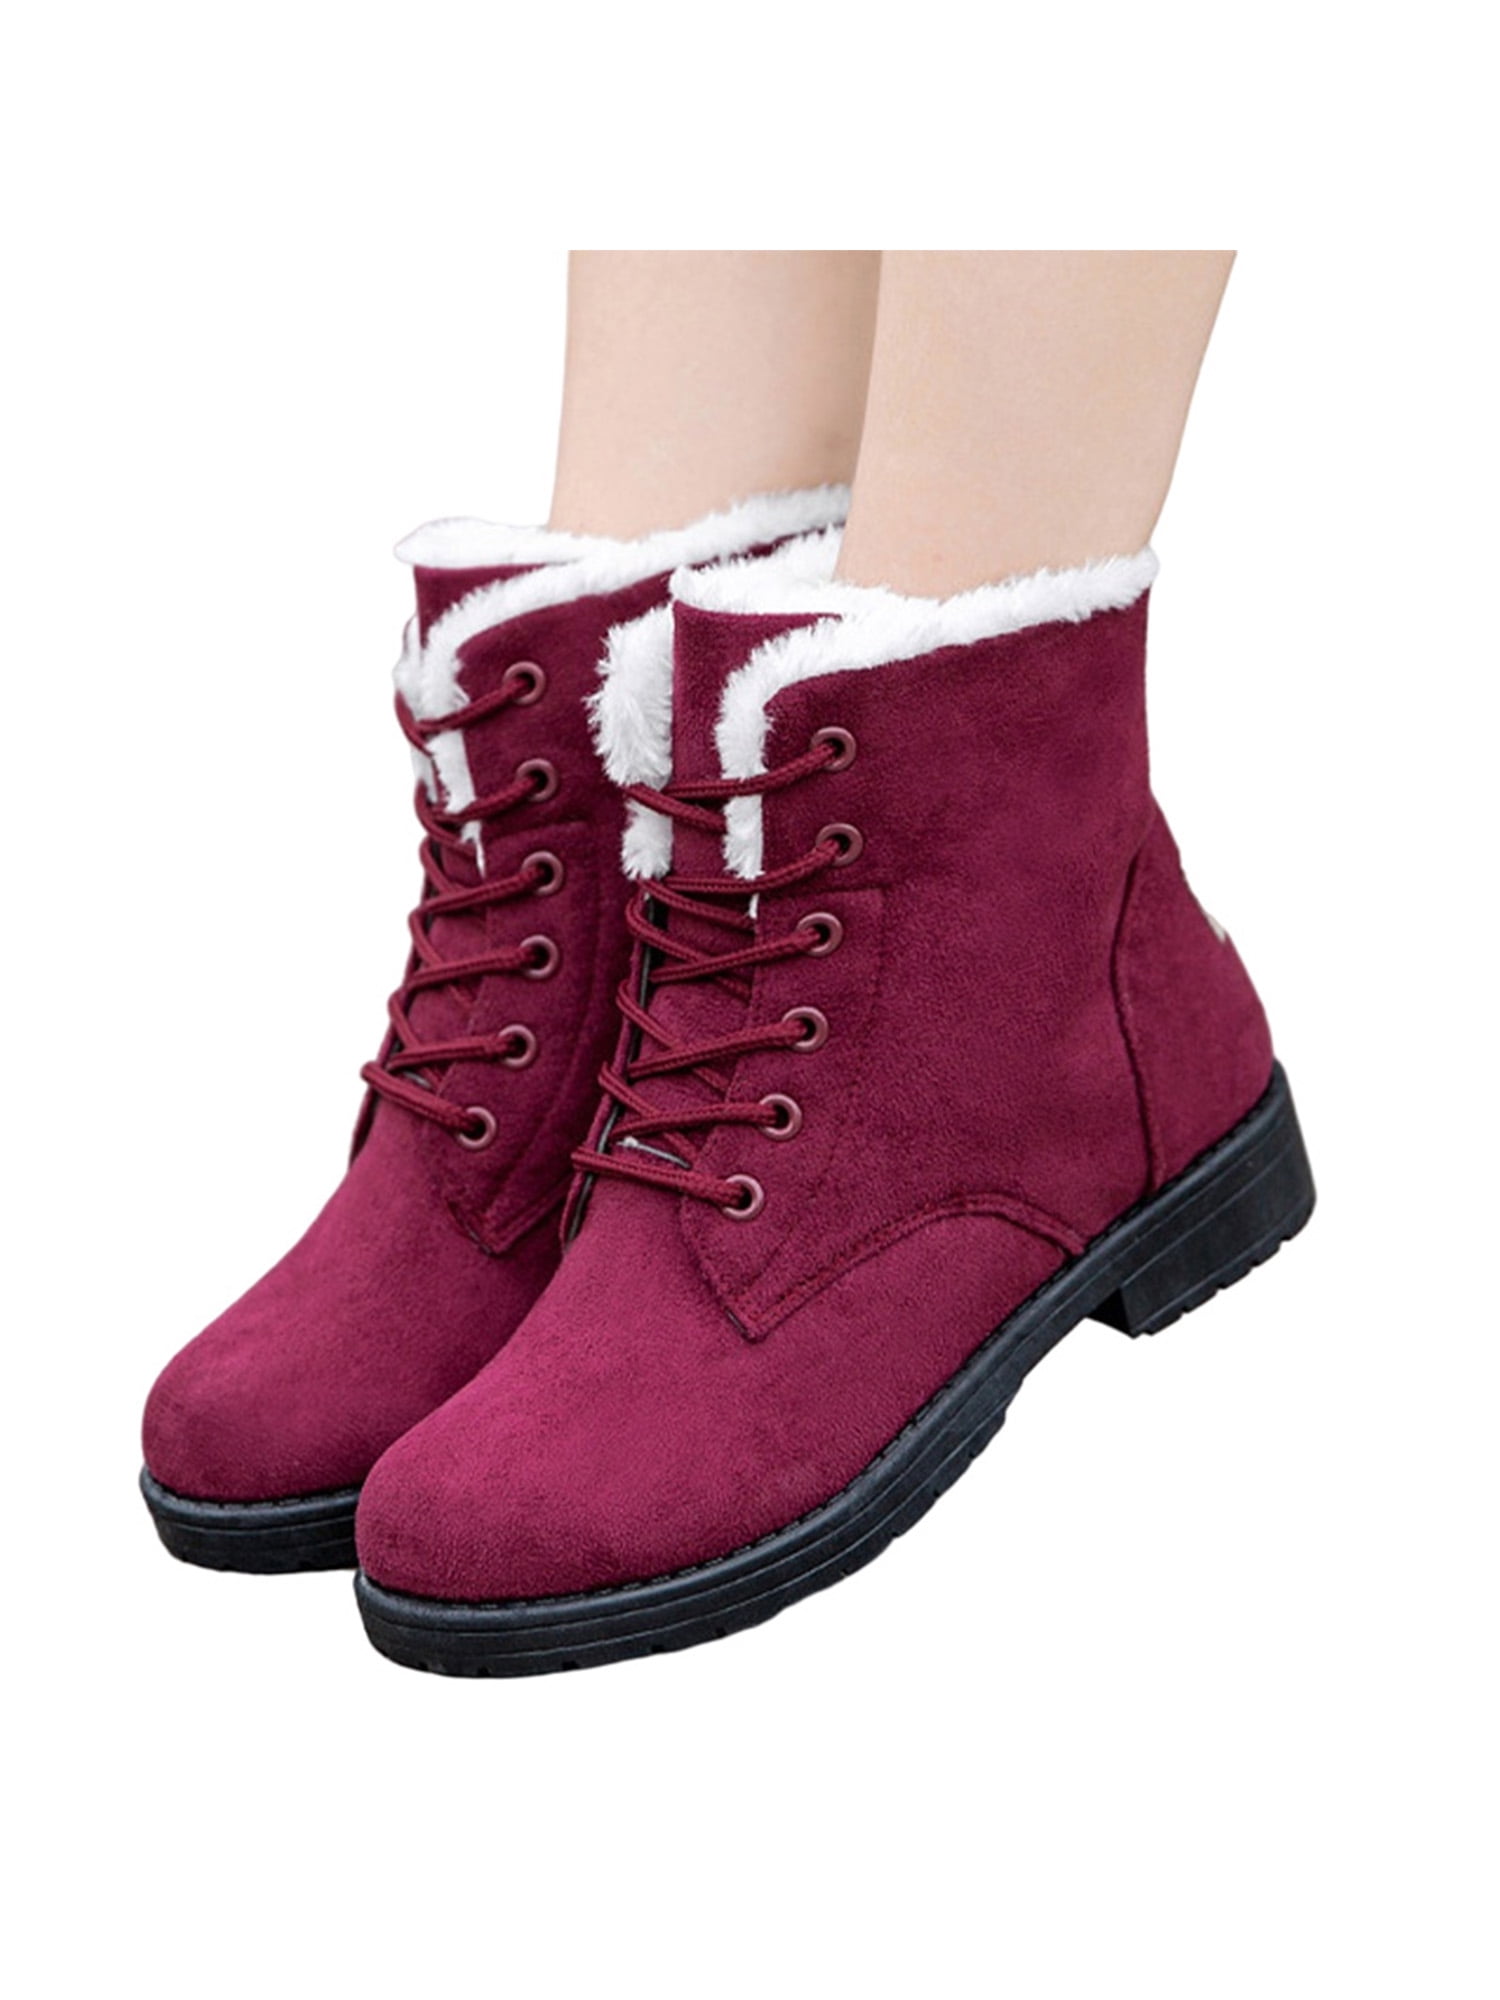 Womens Faux Suede Heart Floral Warm Flat Snow Winter Shoes Ankle Boots Round Toe 